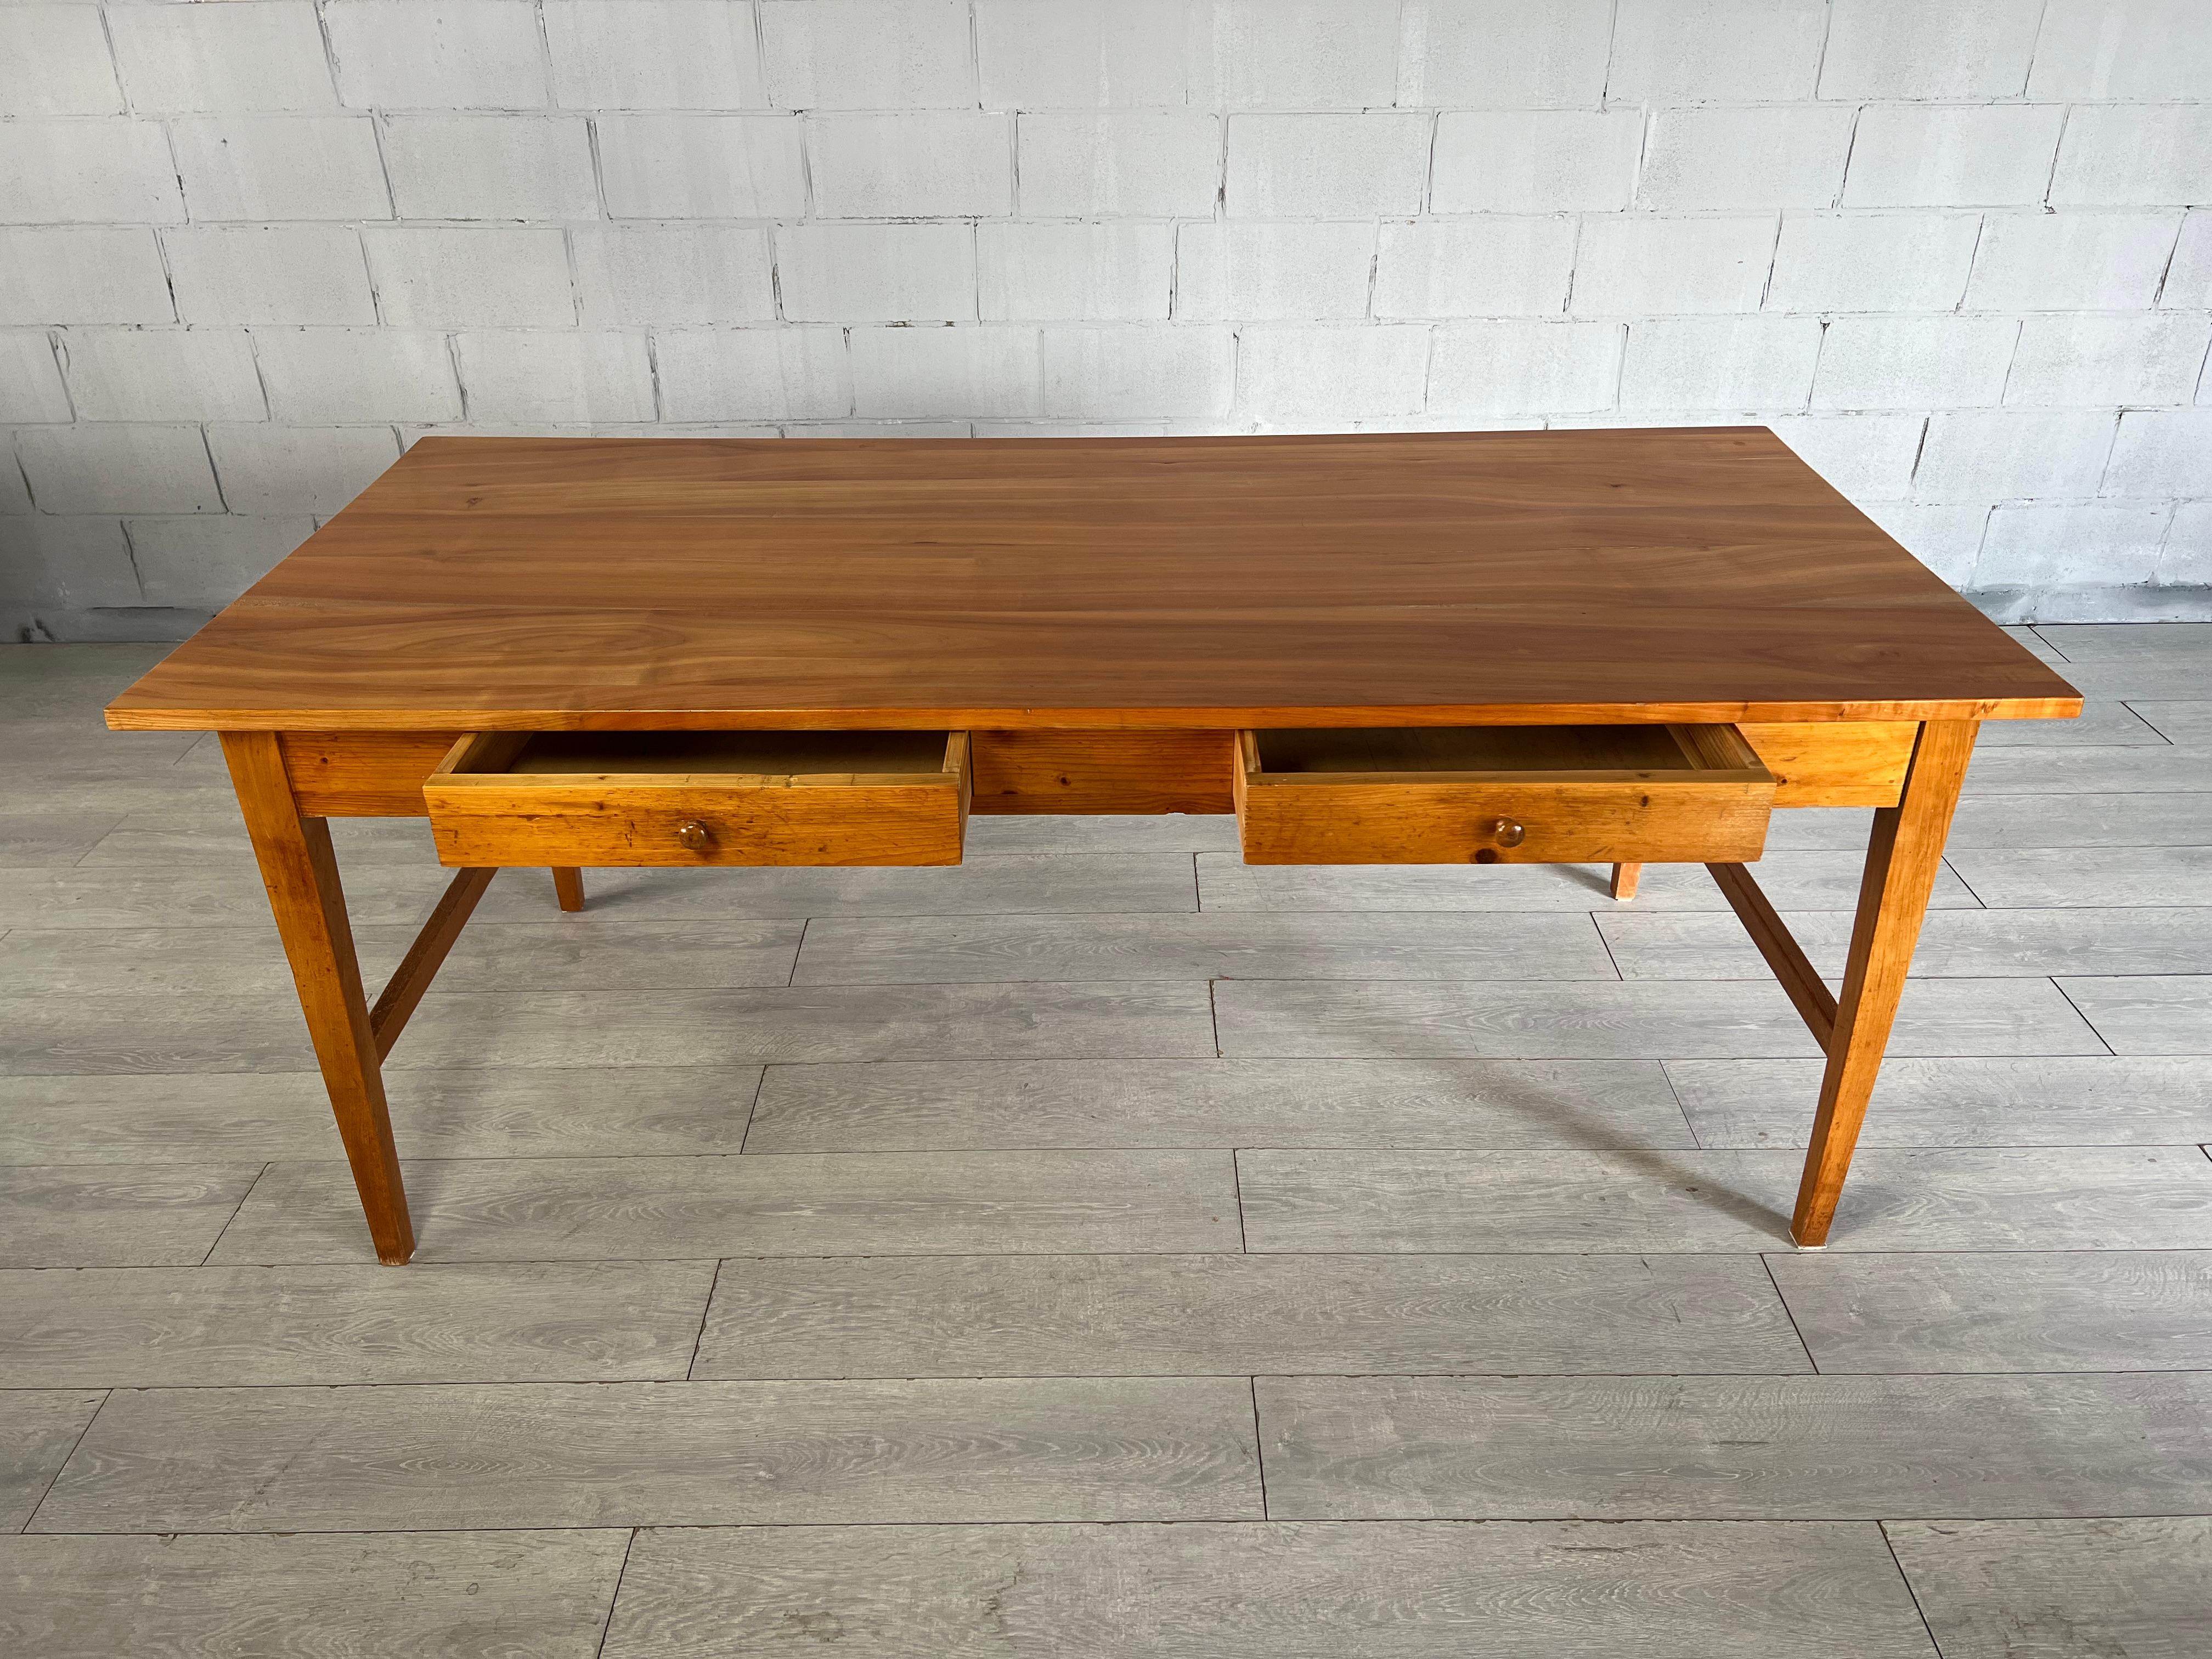 20th Century French Walnut Provincial Kitchen Dining Table With Two Storage Drawers